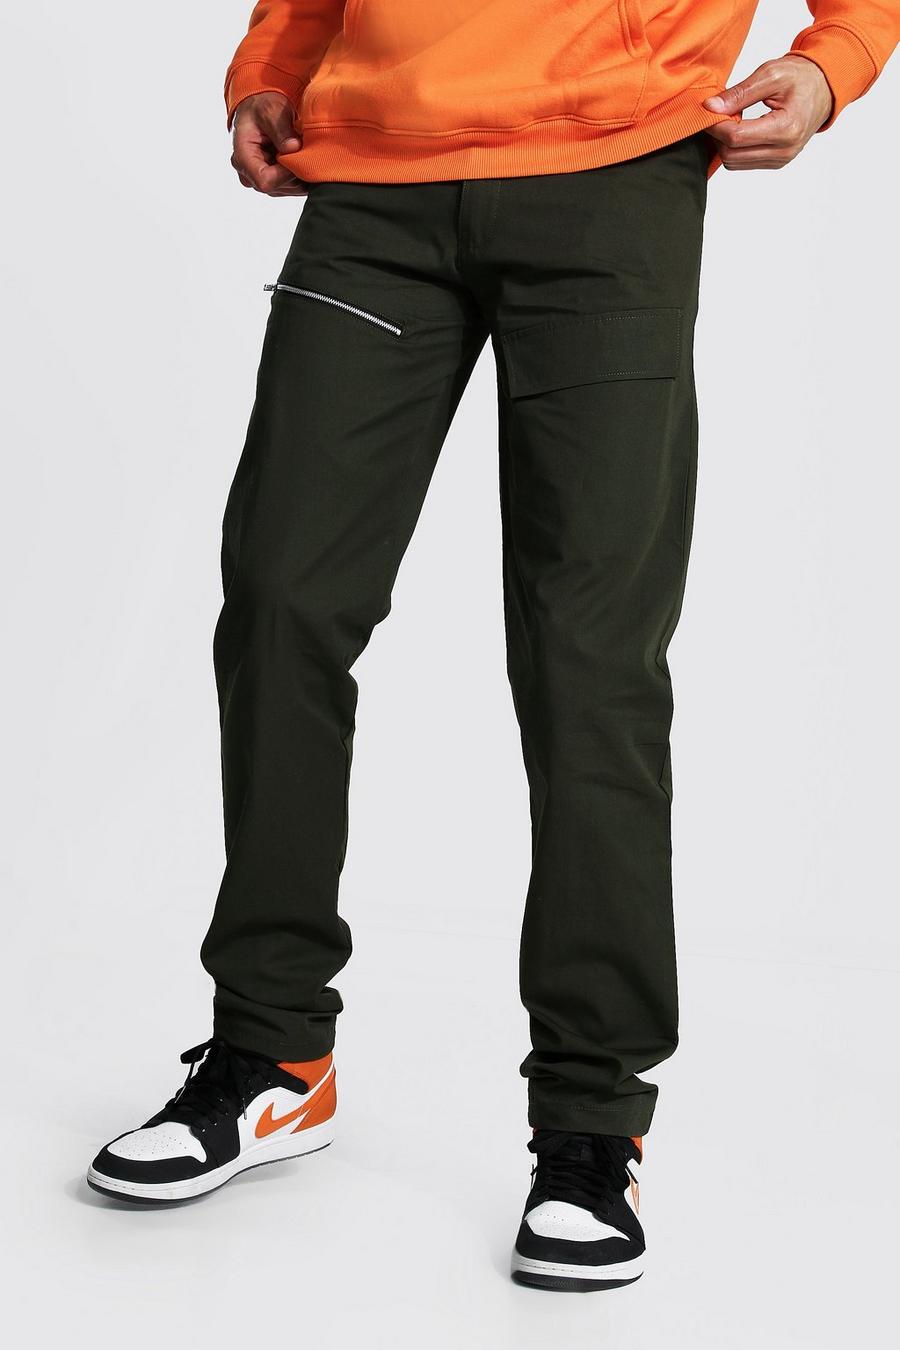 Khaki Tall Straight Leg Trousers With Front Pockets image number 1